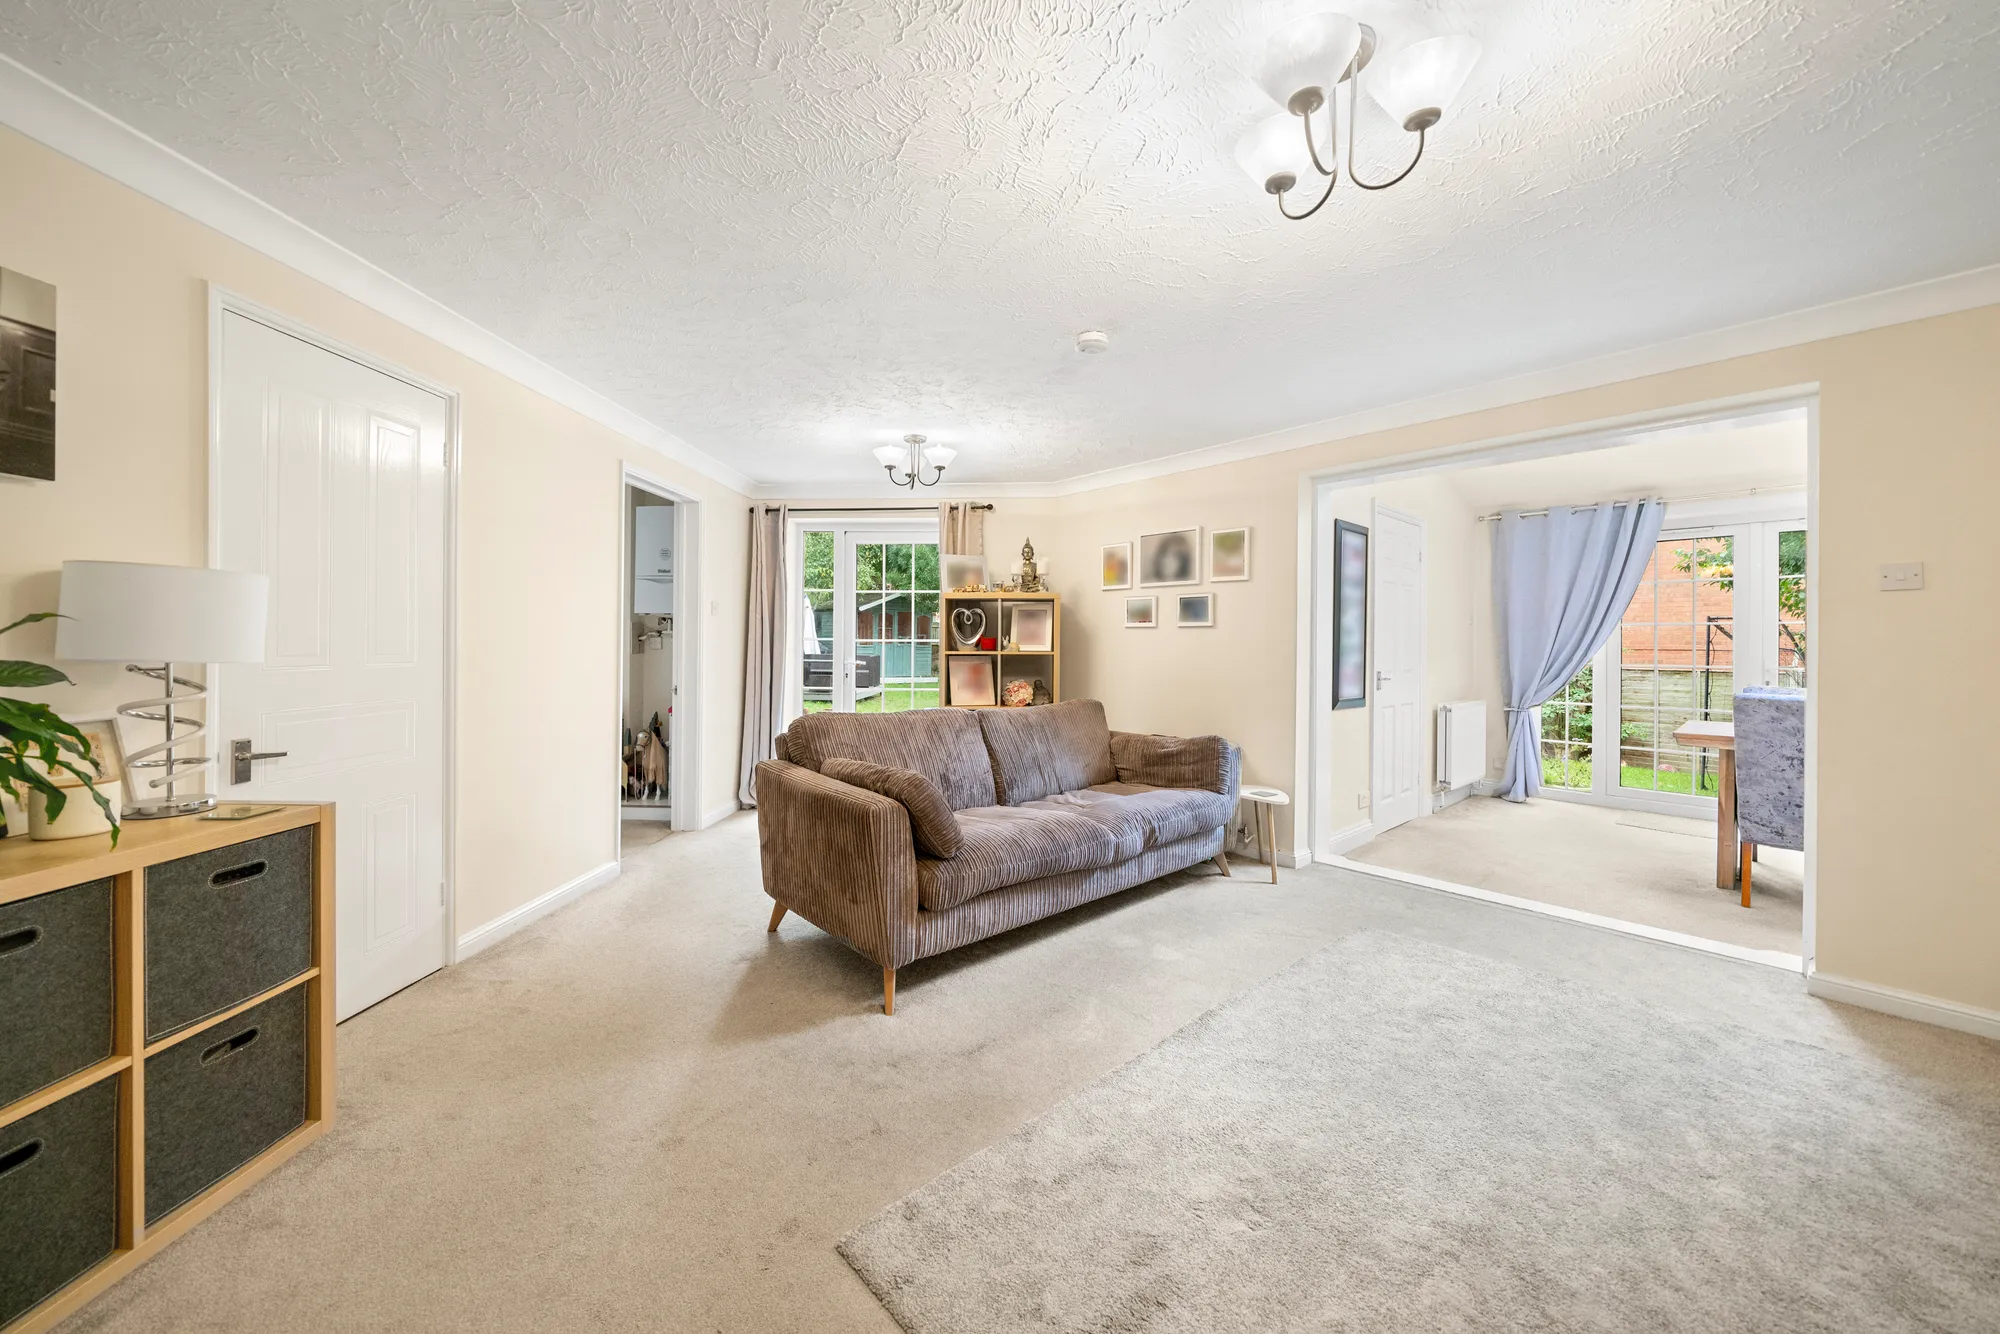 3 bed mid-terraced house for sale in Hartigan Place, Reading 2